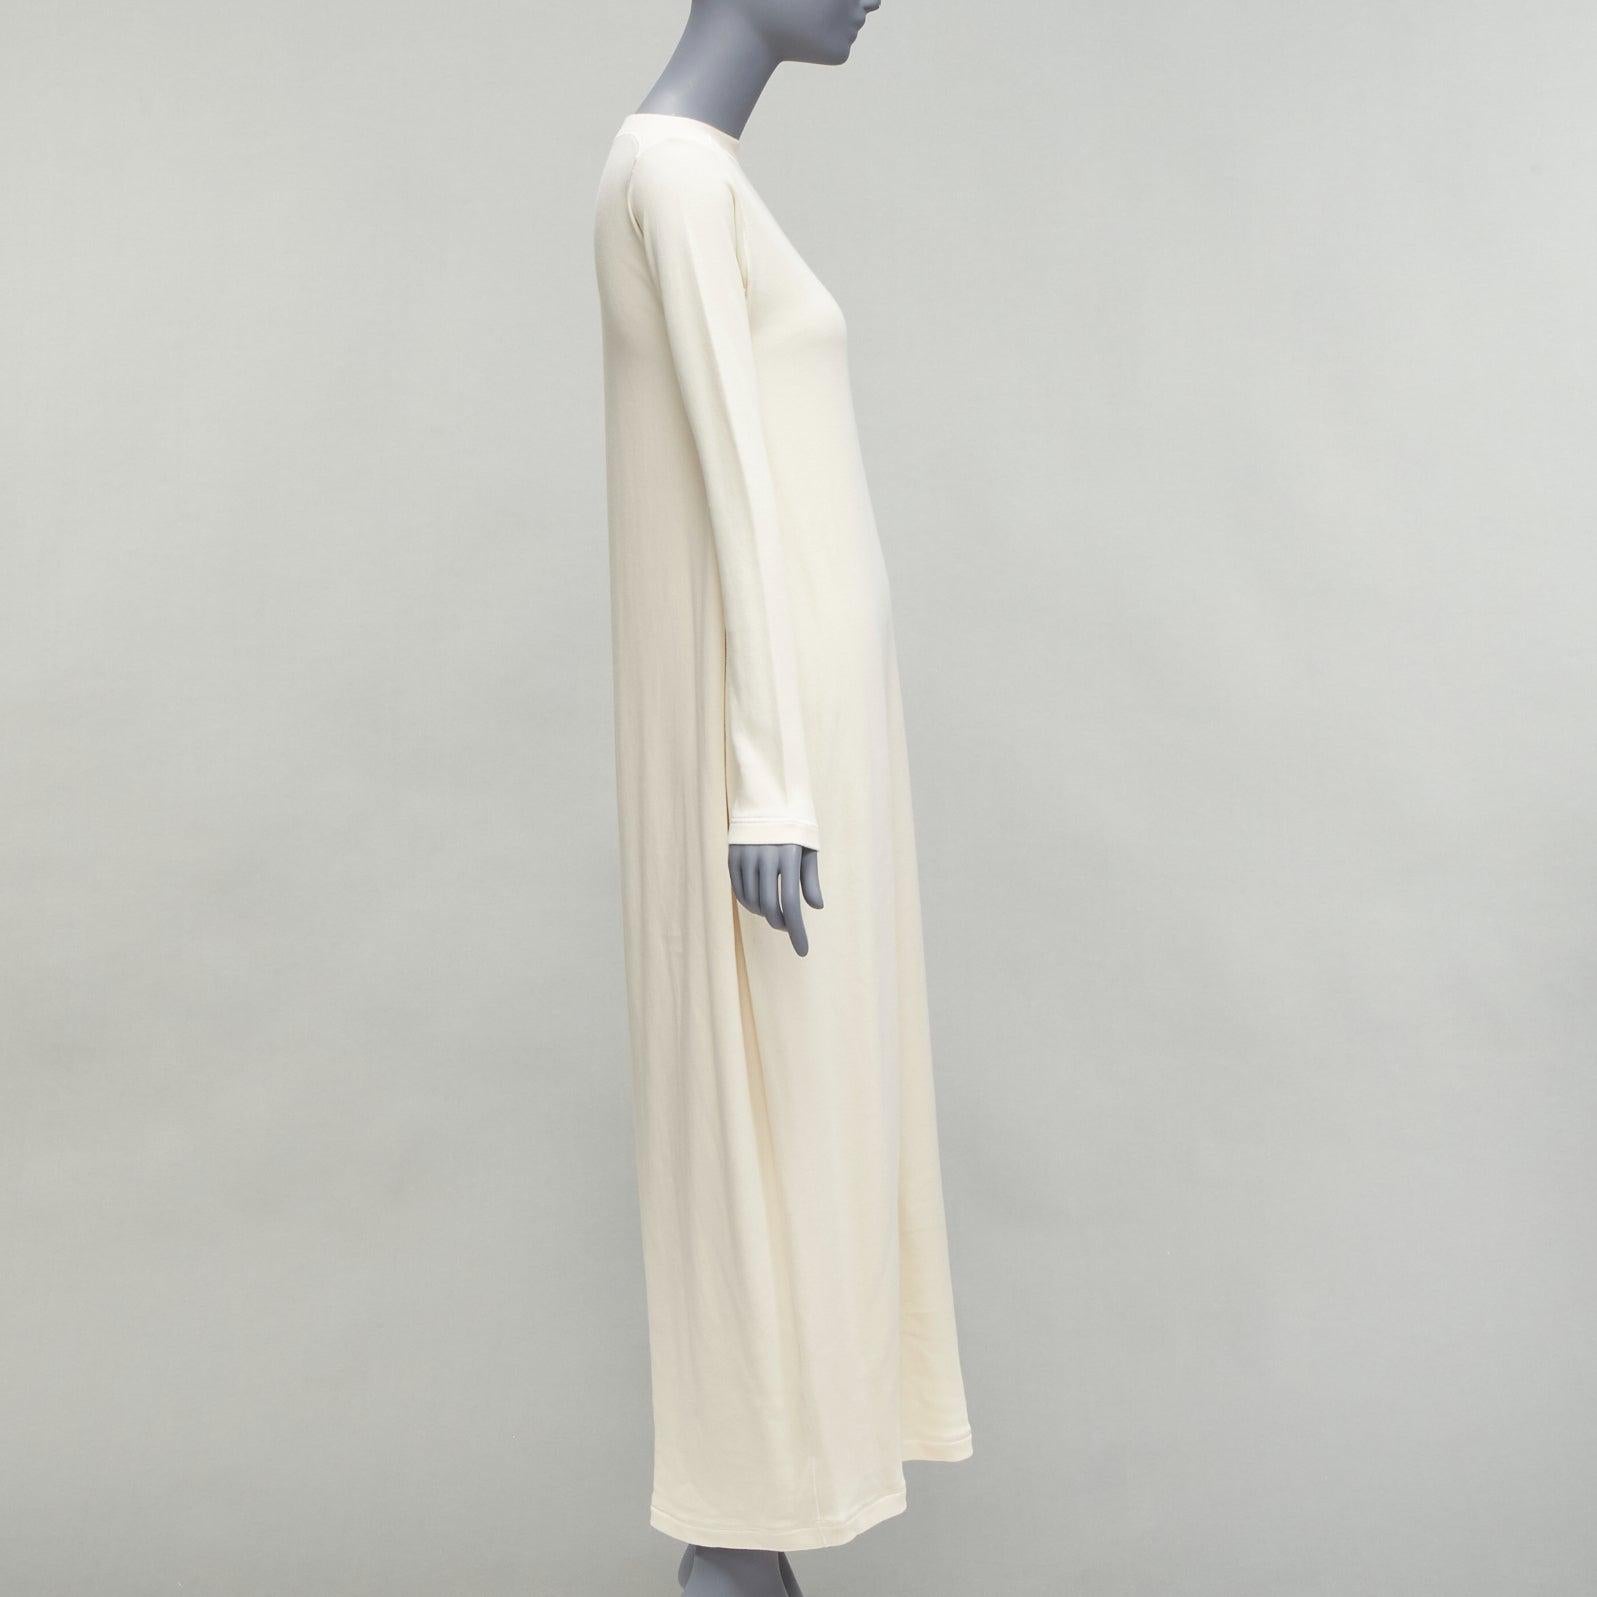 JIL SANDER 2020 cream cotton jersey panelled minimal long sleeve midi dress FR34 XS
Reference: LNKO/A02185
Brand: Jil Sander
Collection: Jil Sander+ 2020
Material: Cotton
Color: Cream
Pattern: Solid
Closure: Pull On
Made in: